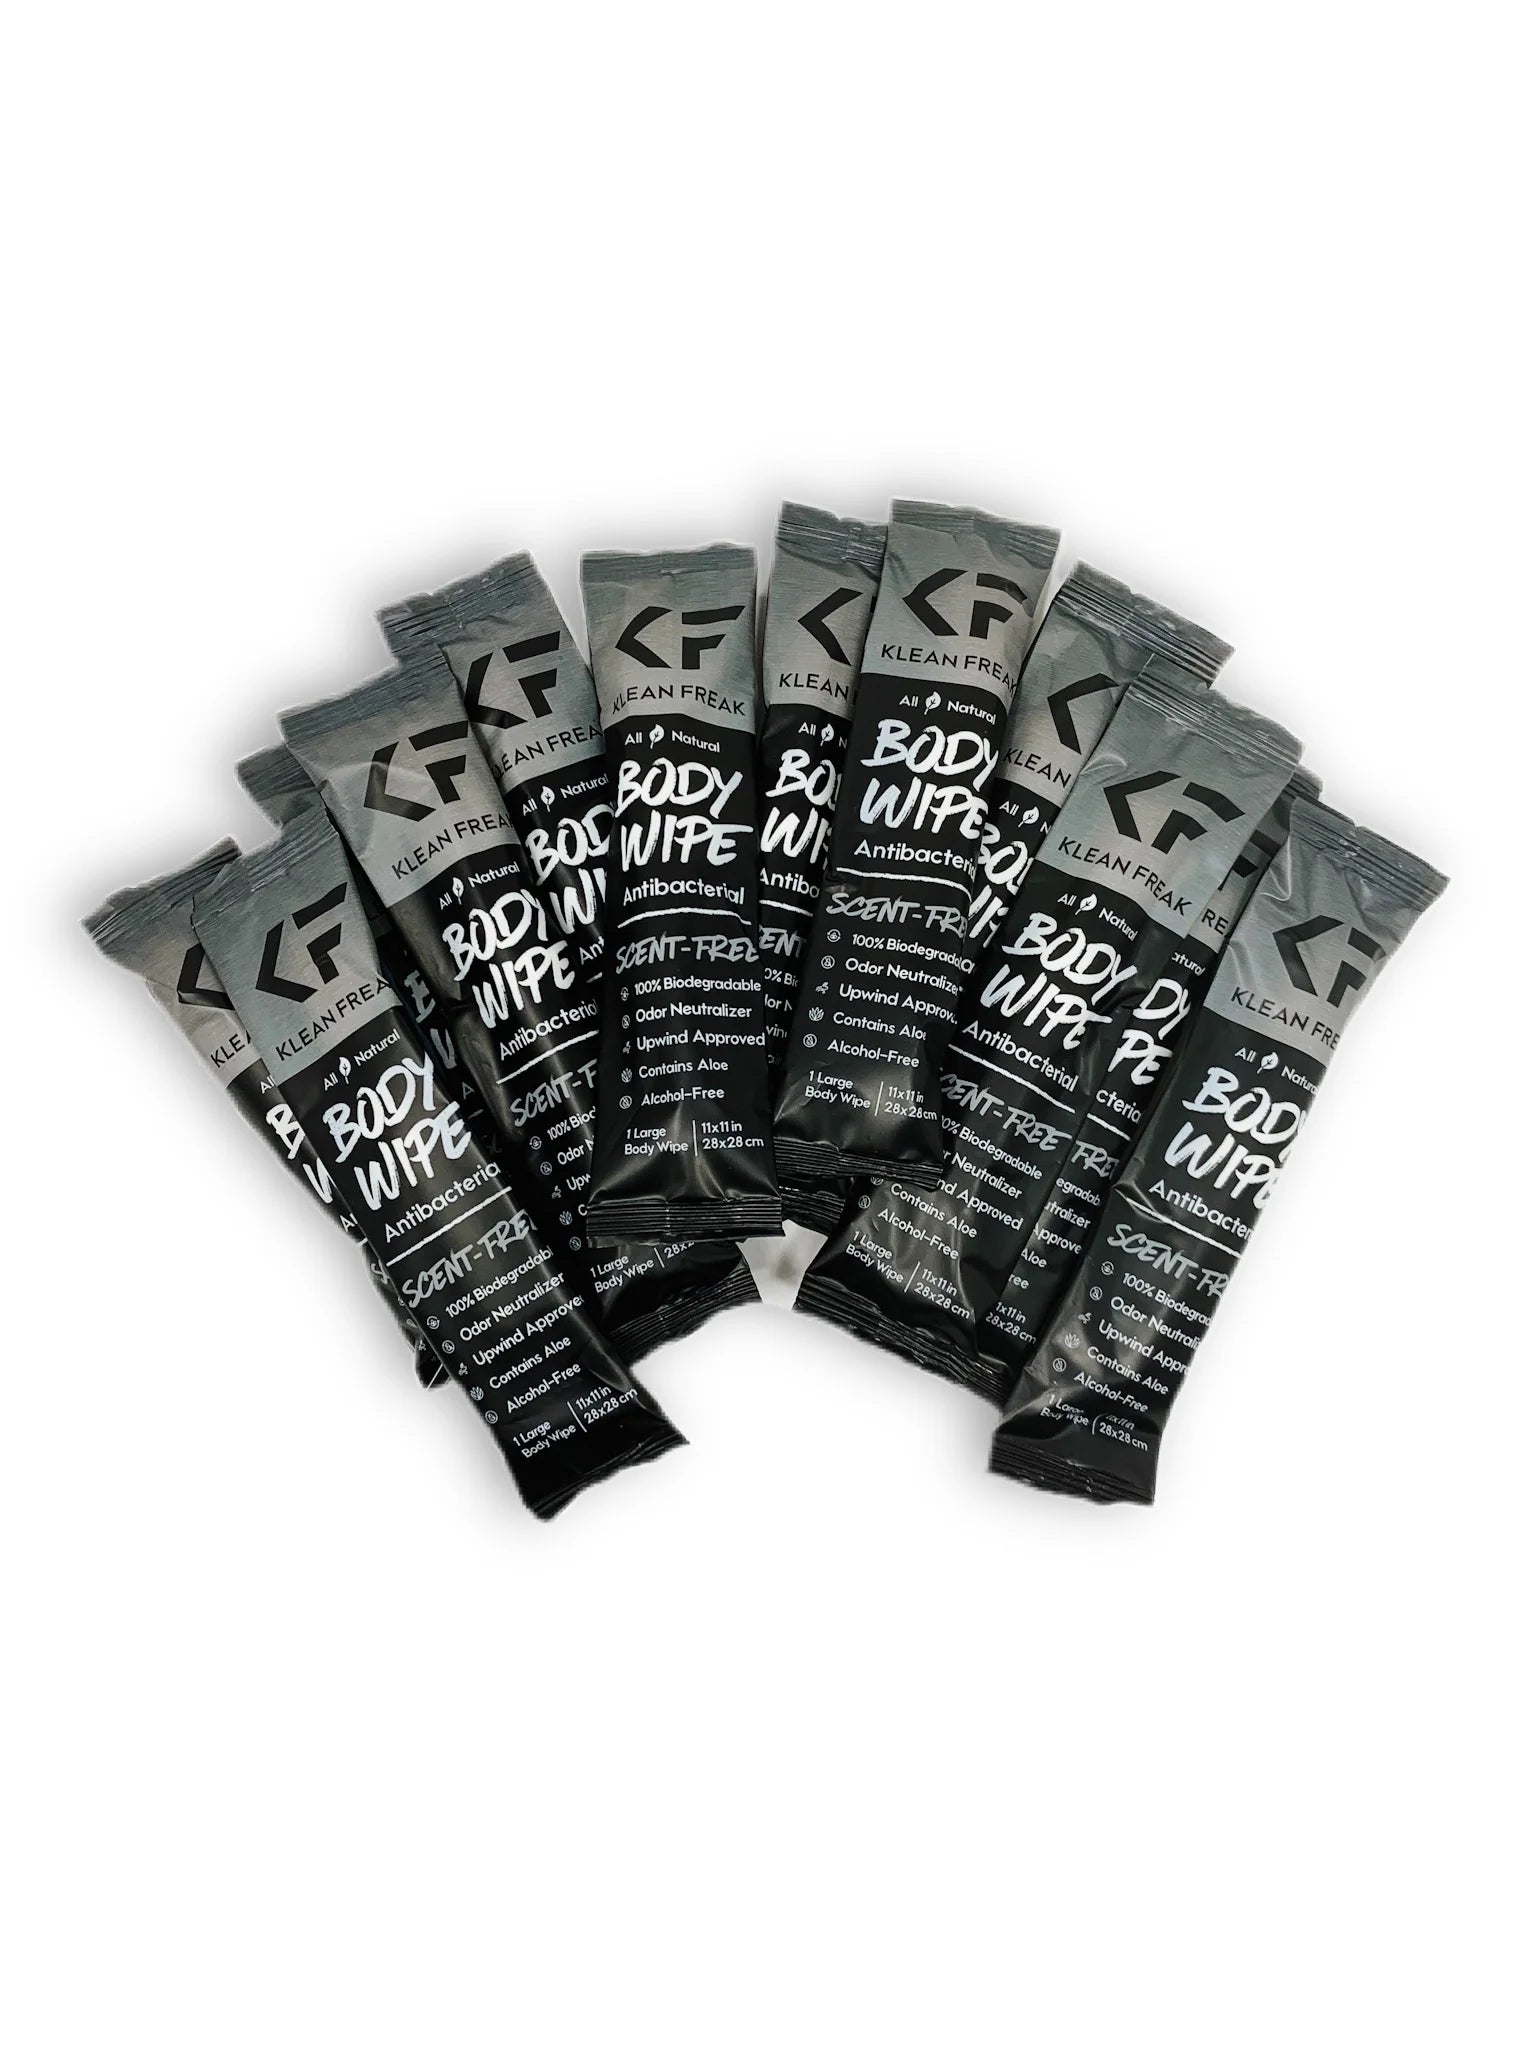 Klean Freak Body Wipes 12pk (Scent Free) -  - Mansfield Hunting & Fishing - Products to prepare for Corona Virus